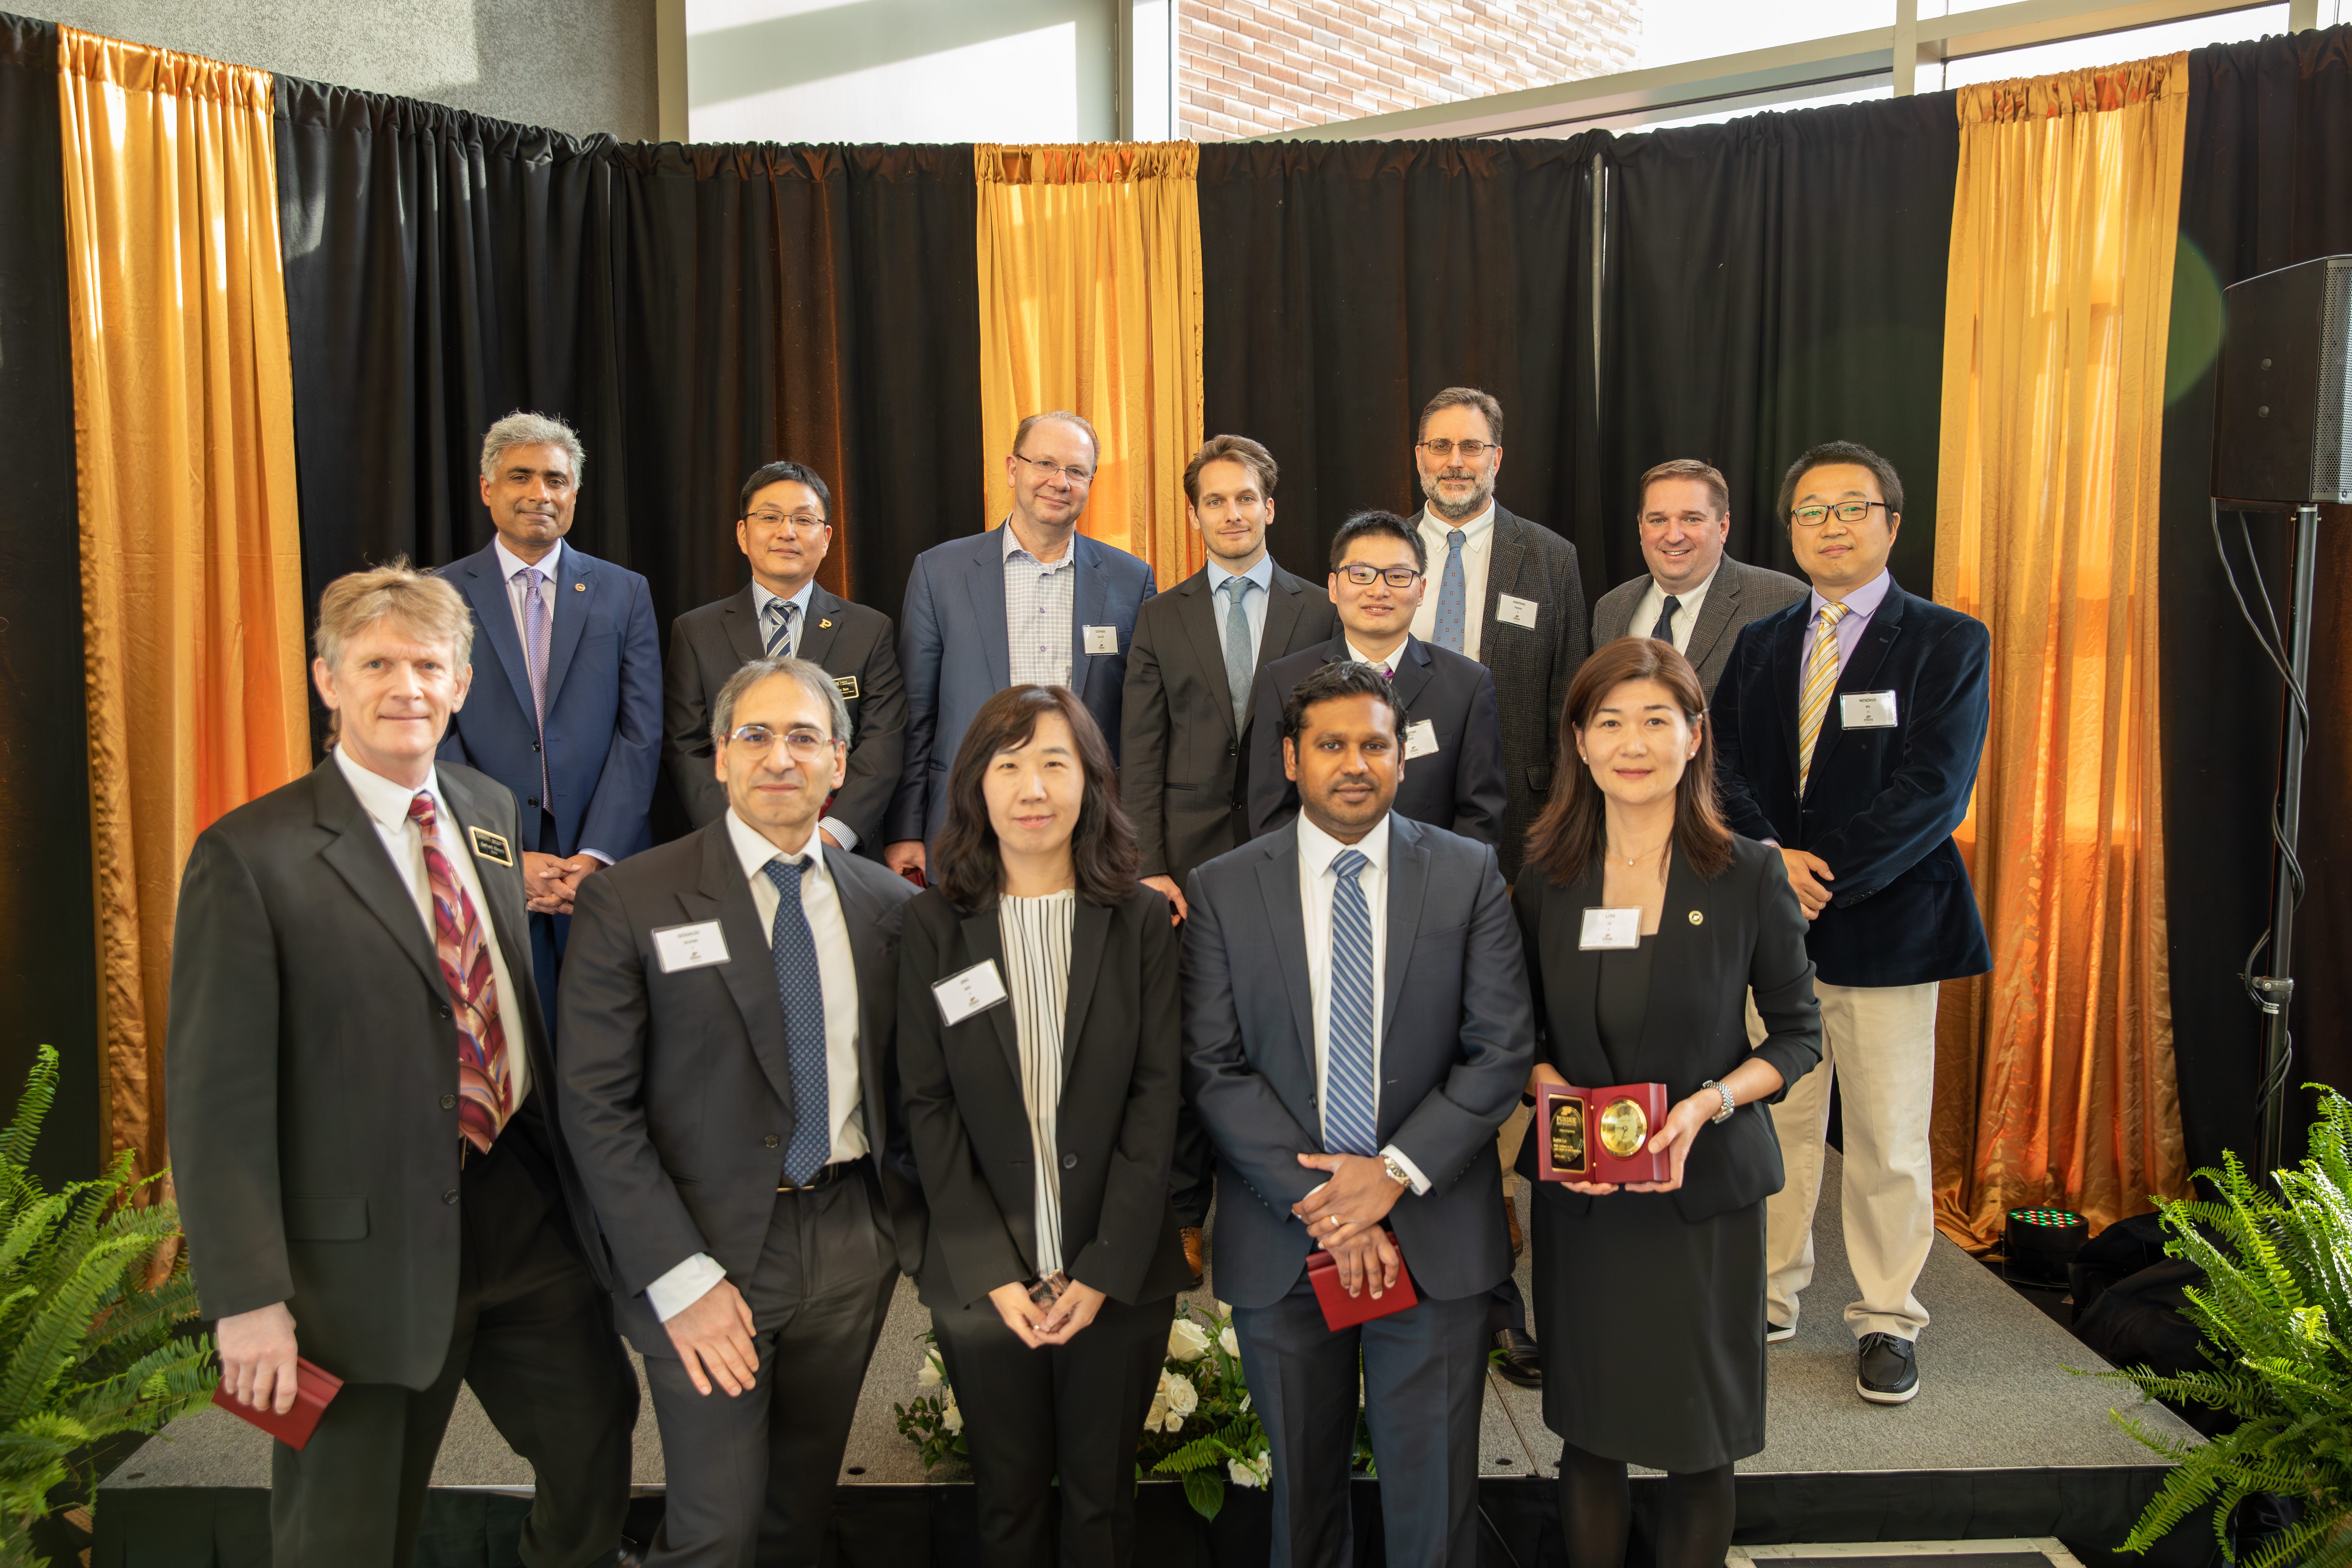 Faculty members honored at the Faculty and Lecturer Excellence Awards